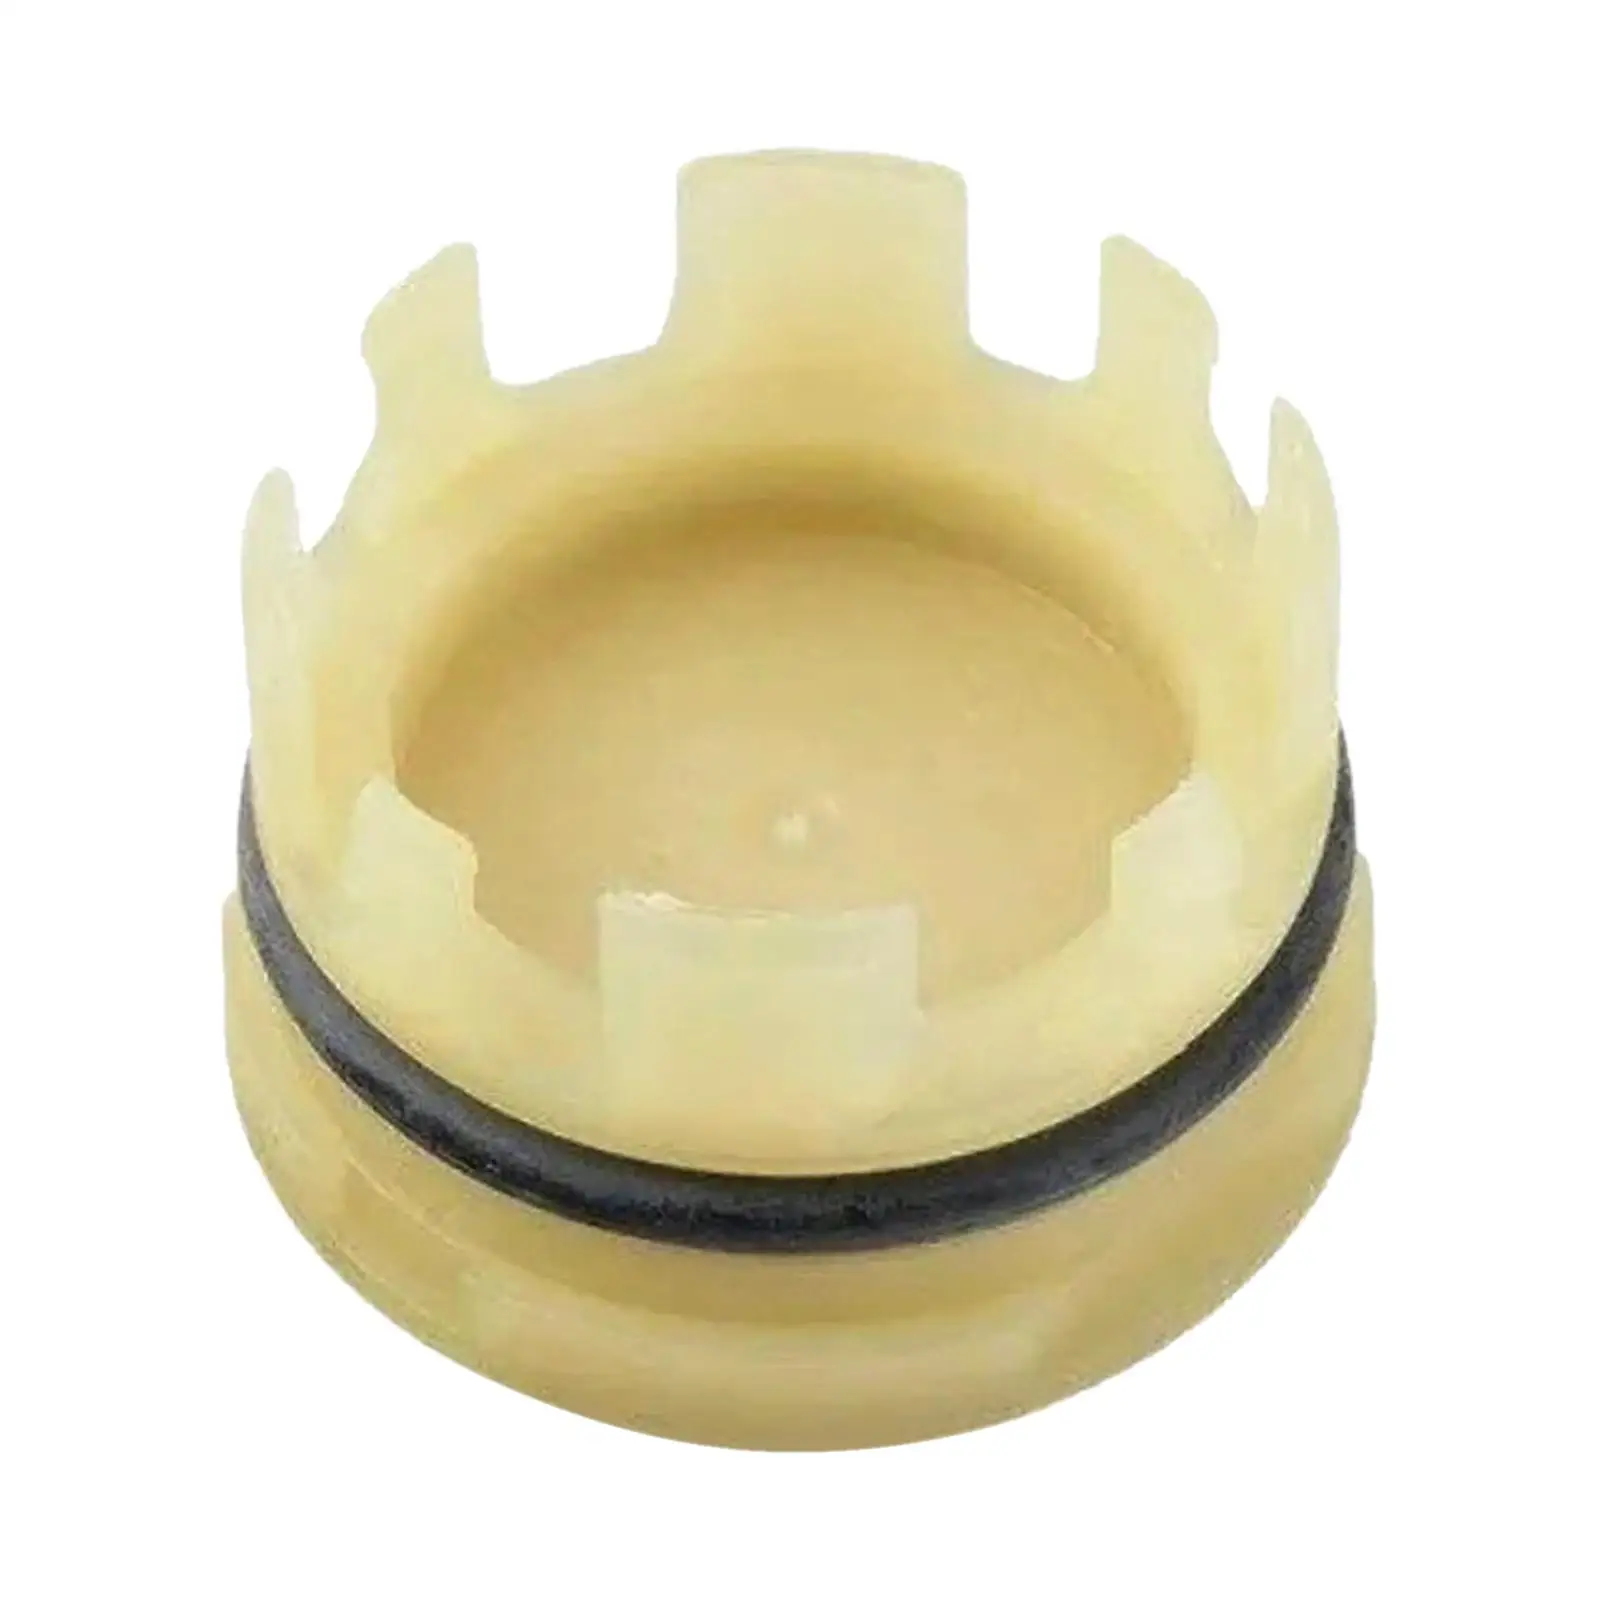 Engine End Cover with Gasket High Reliability Accessory Replaces Cylinder Head Gasket for BMW 1 Series F20 E87 E81 Durable